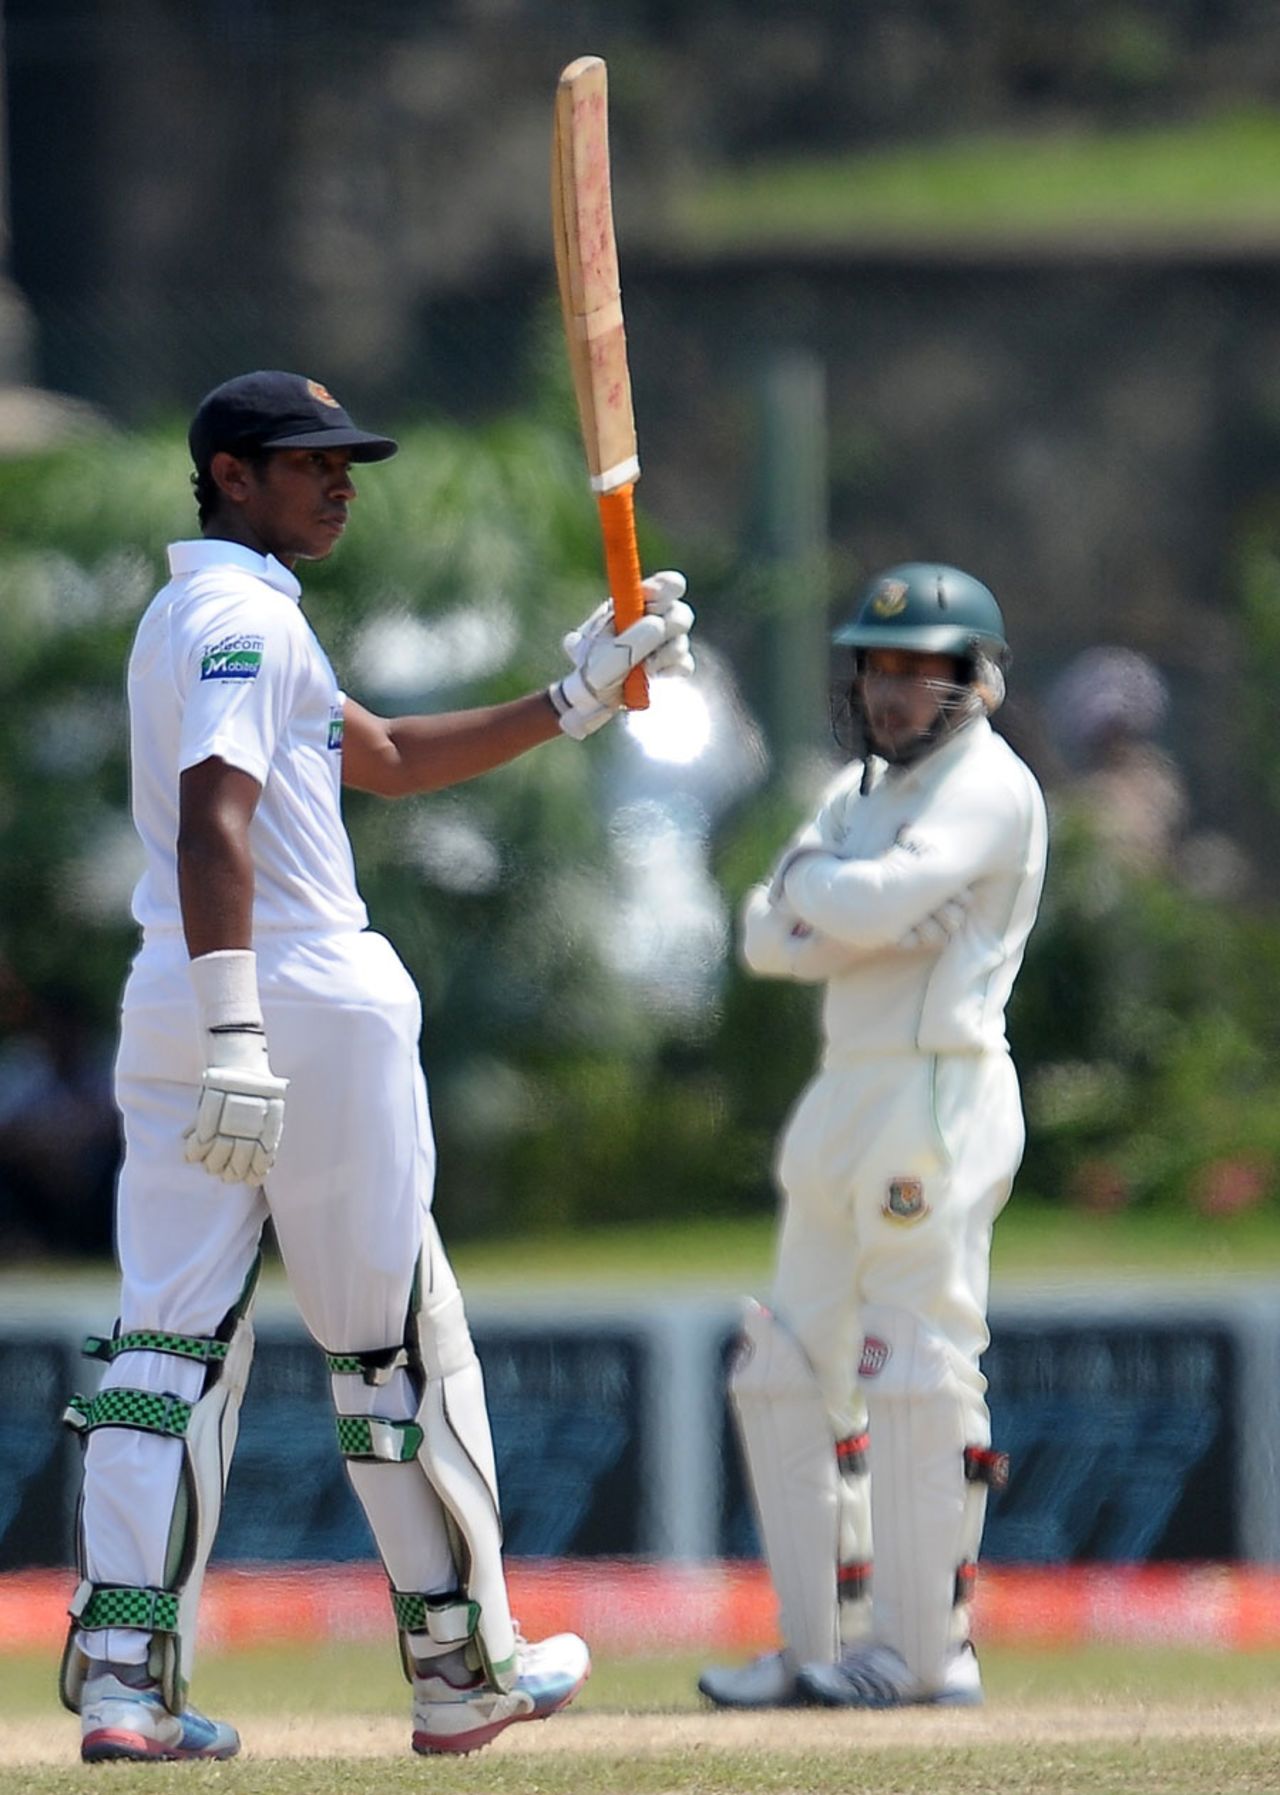 Kithuruwan Vithanage acknowledges the crowd after reaching his fifty, Sri Lanka v Bangladesh, 1st Test, 5th day, Galle, March 12, 2013